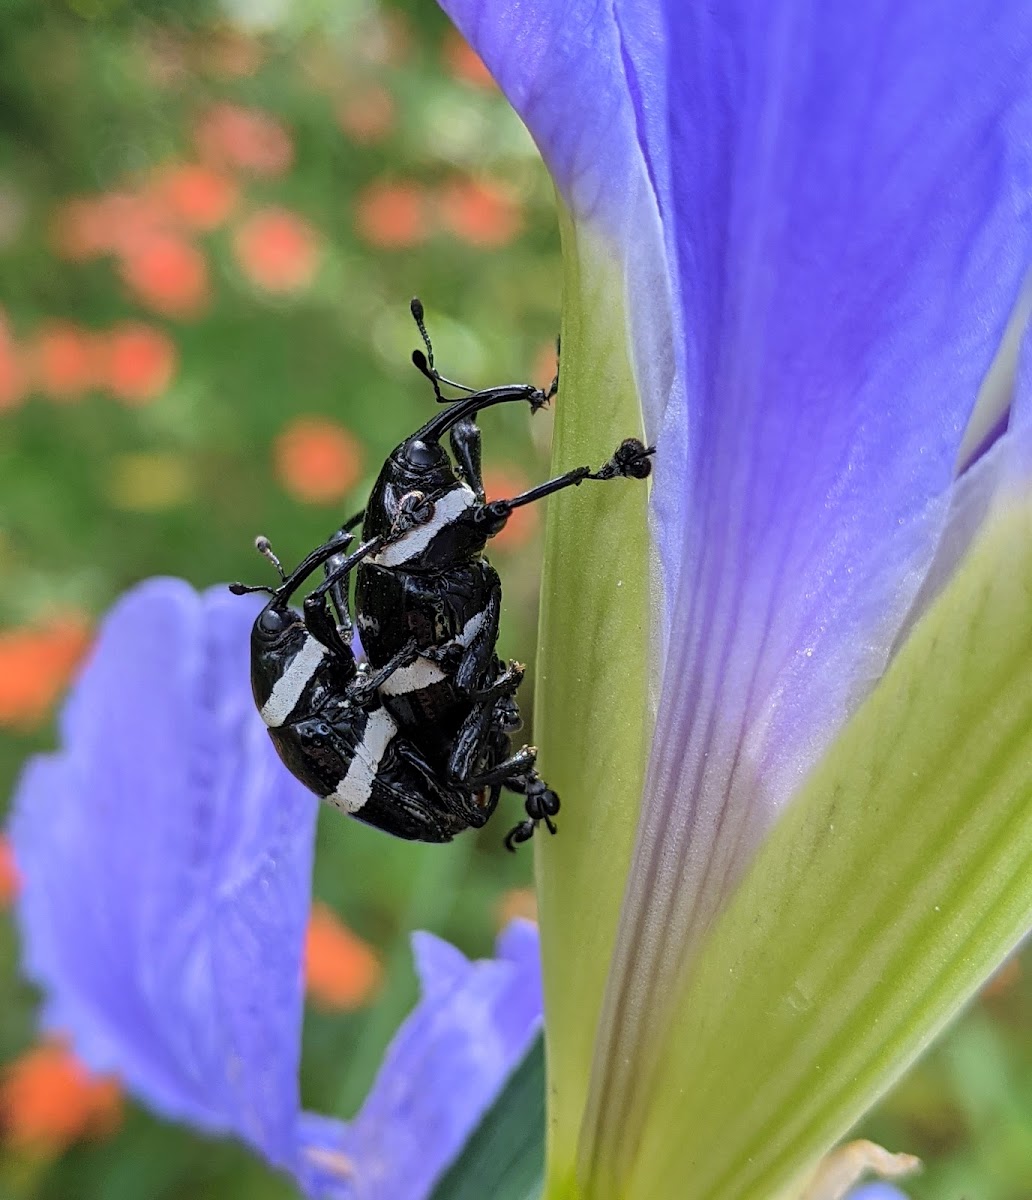 Black and White Weevil